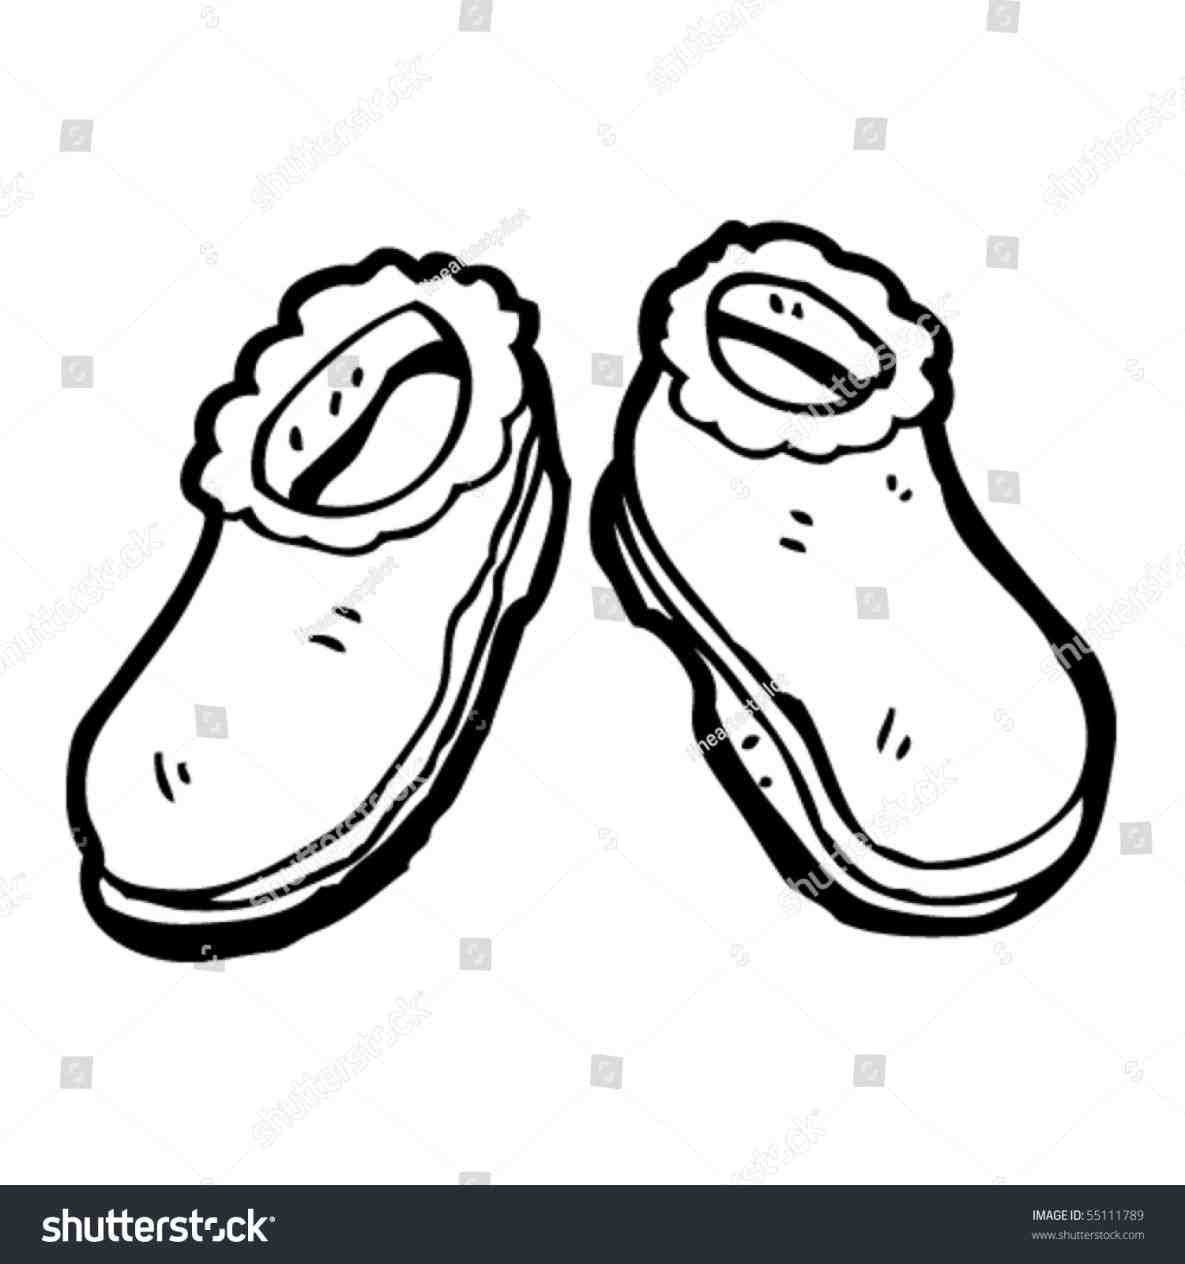 The best free Slippers drawing images. Download from 123 free drawings